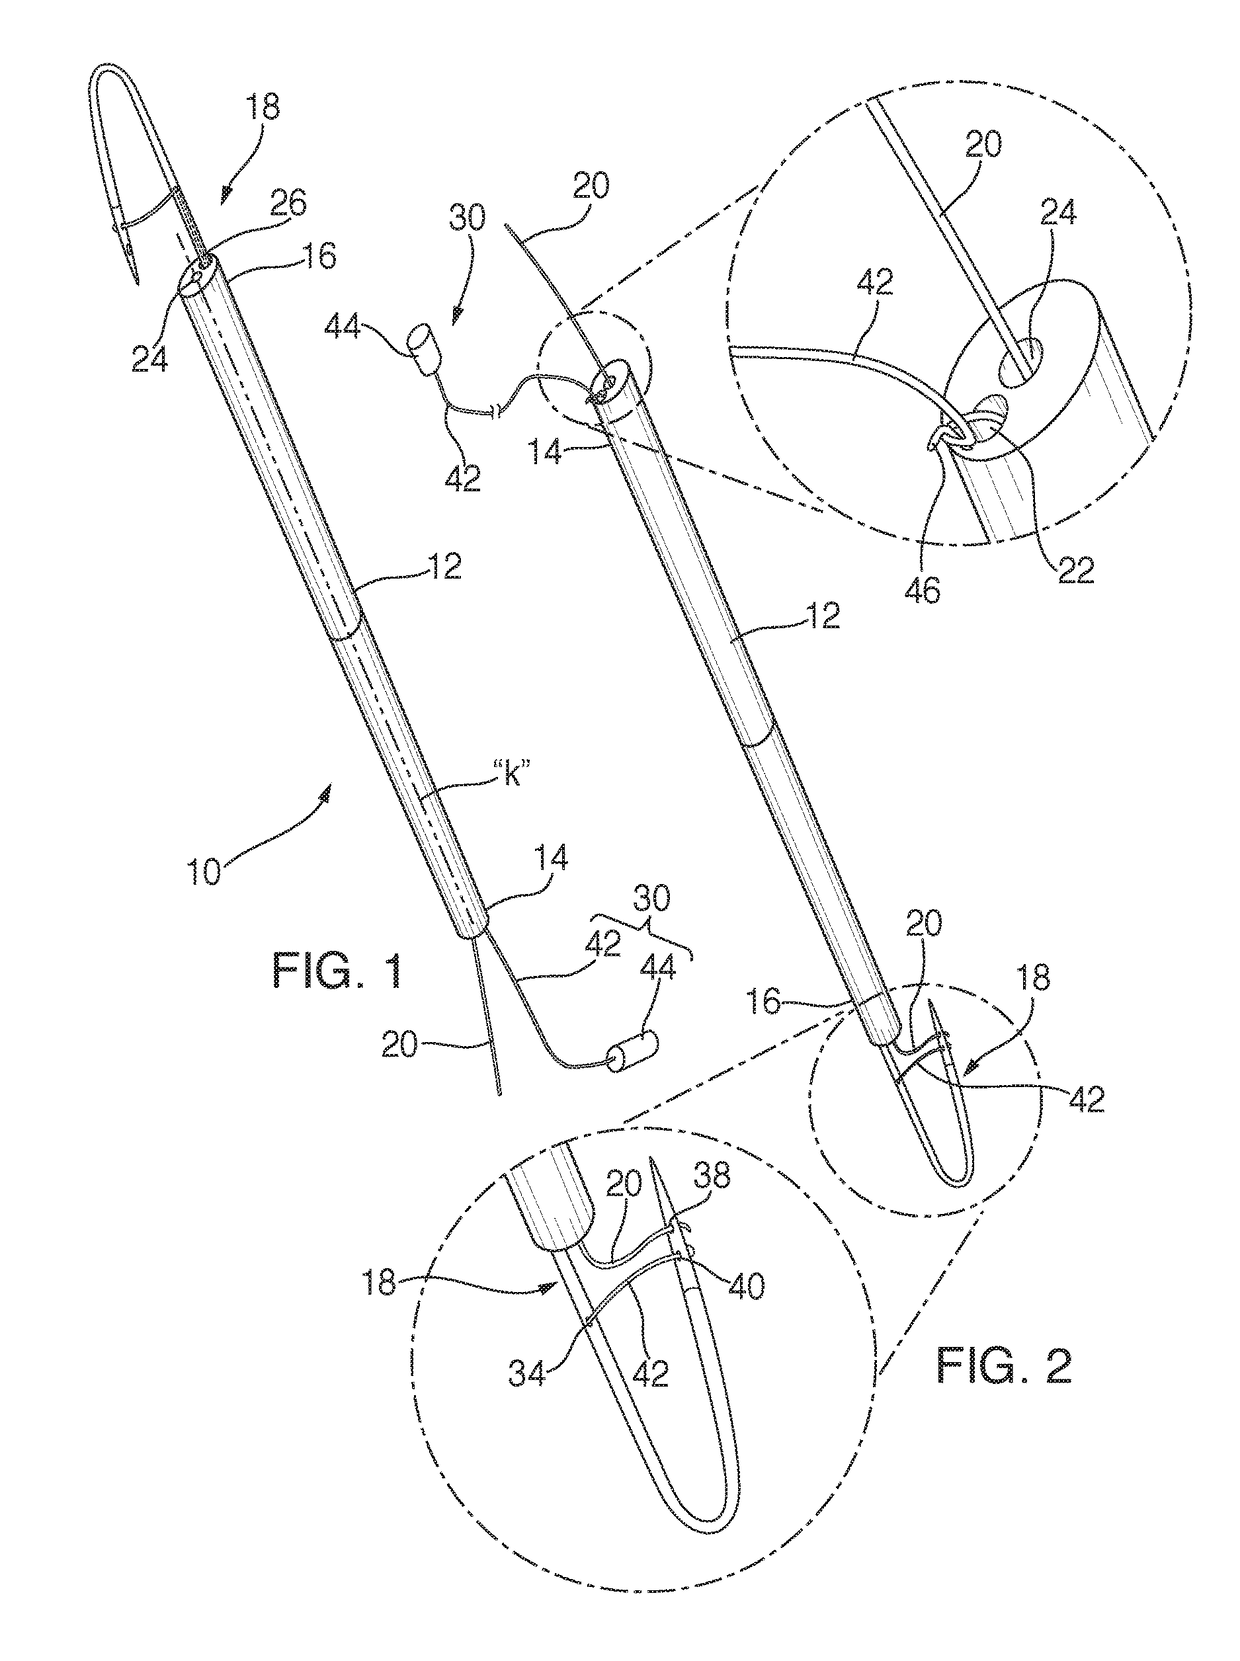 Surgical closure apparatus and method